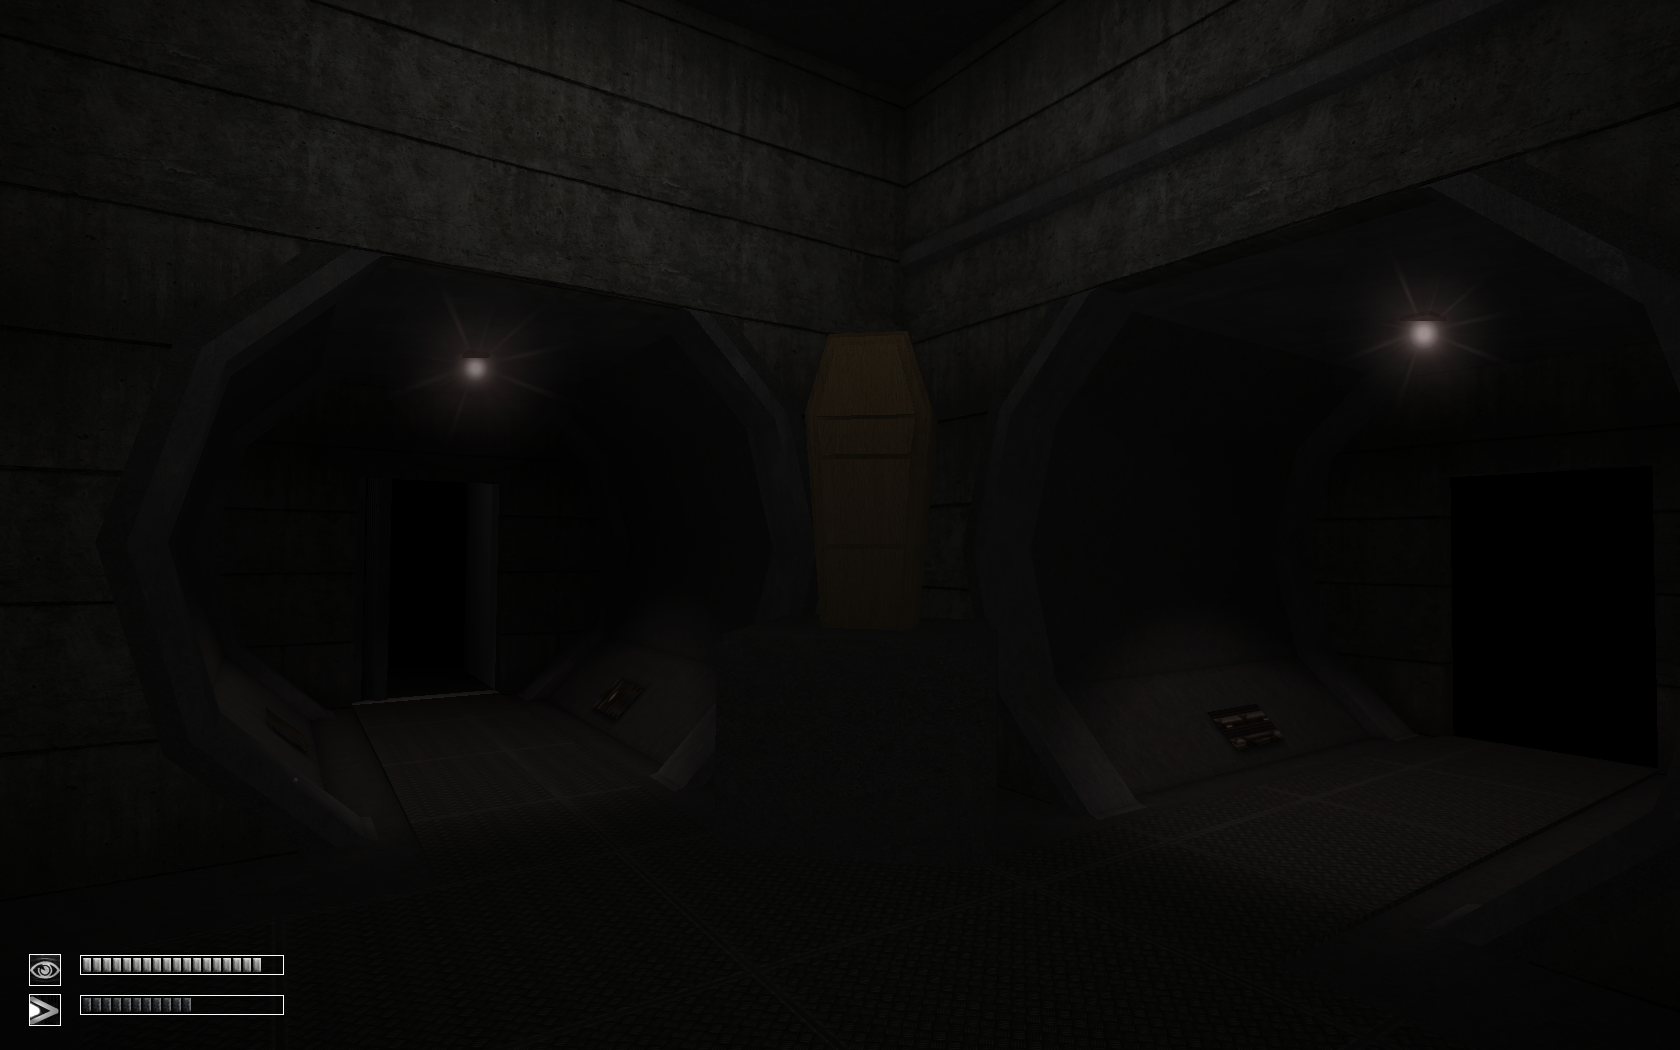 Heavy Containment Zone - Official SCP - Containment Breach Wiki